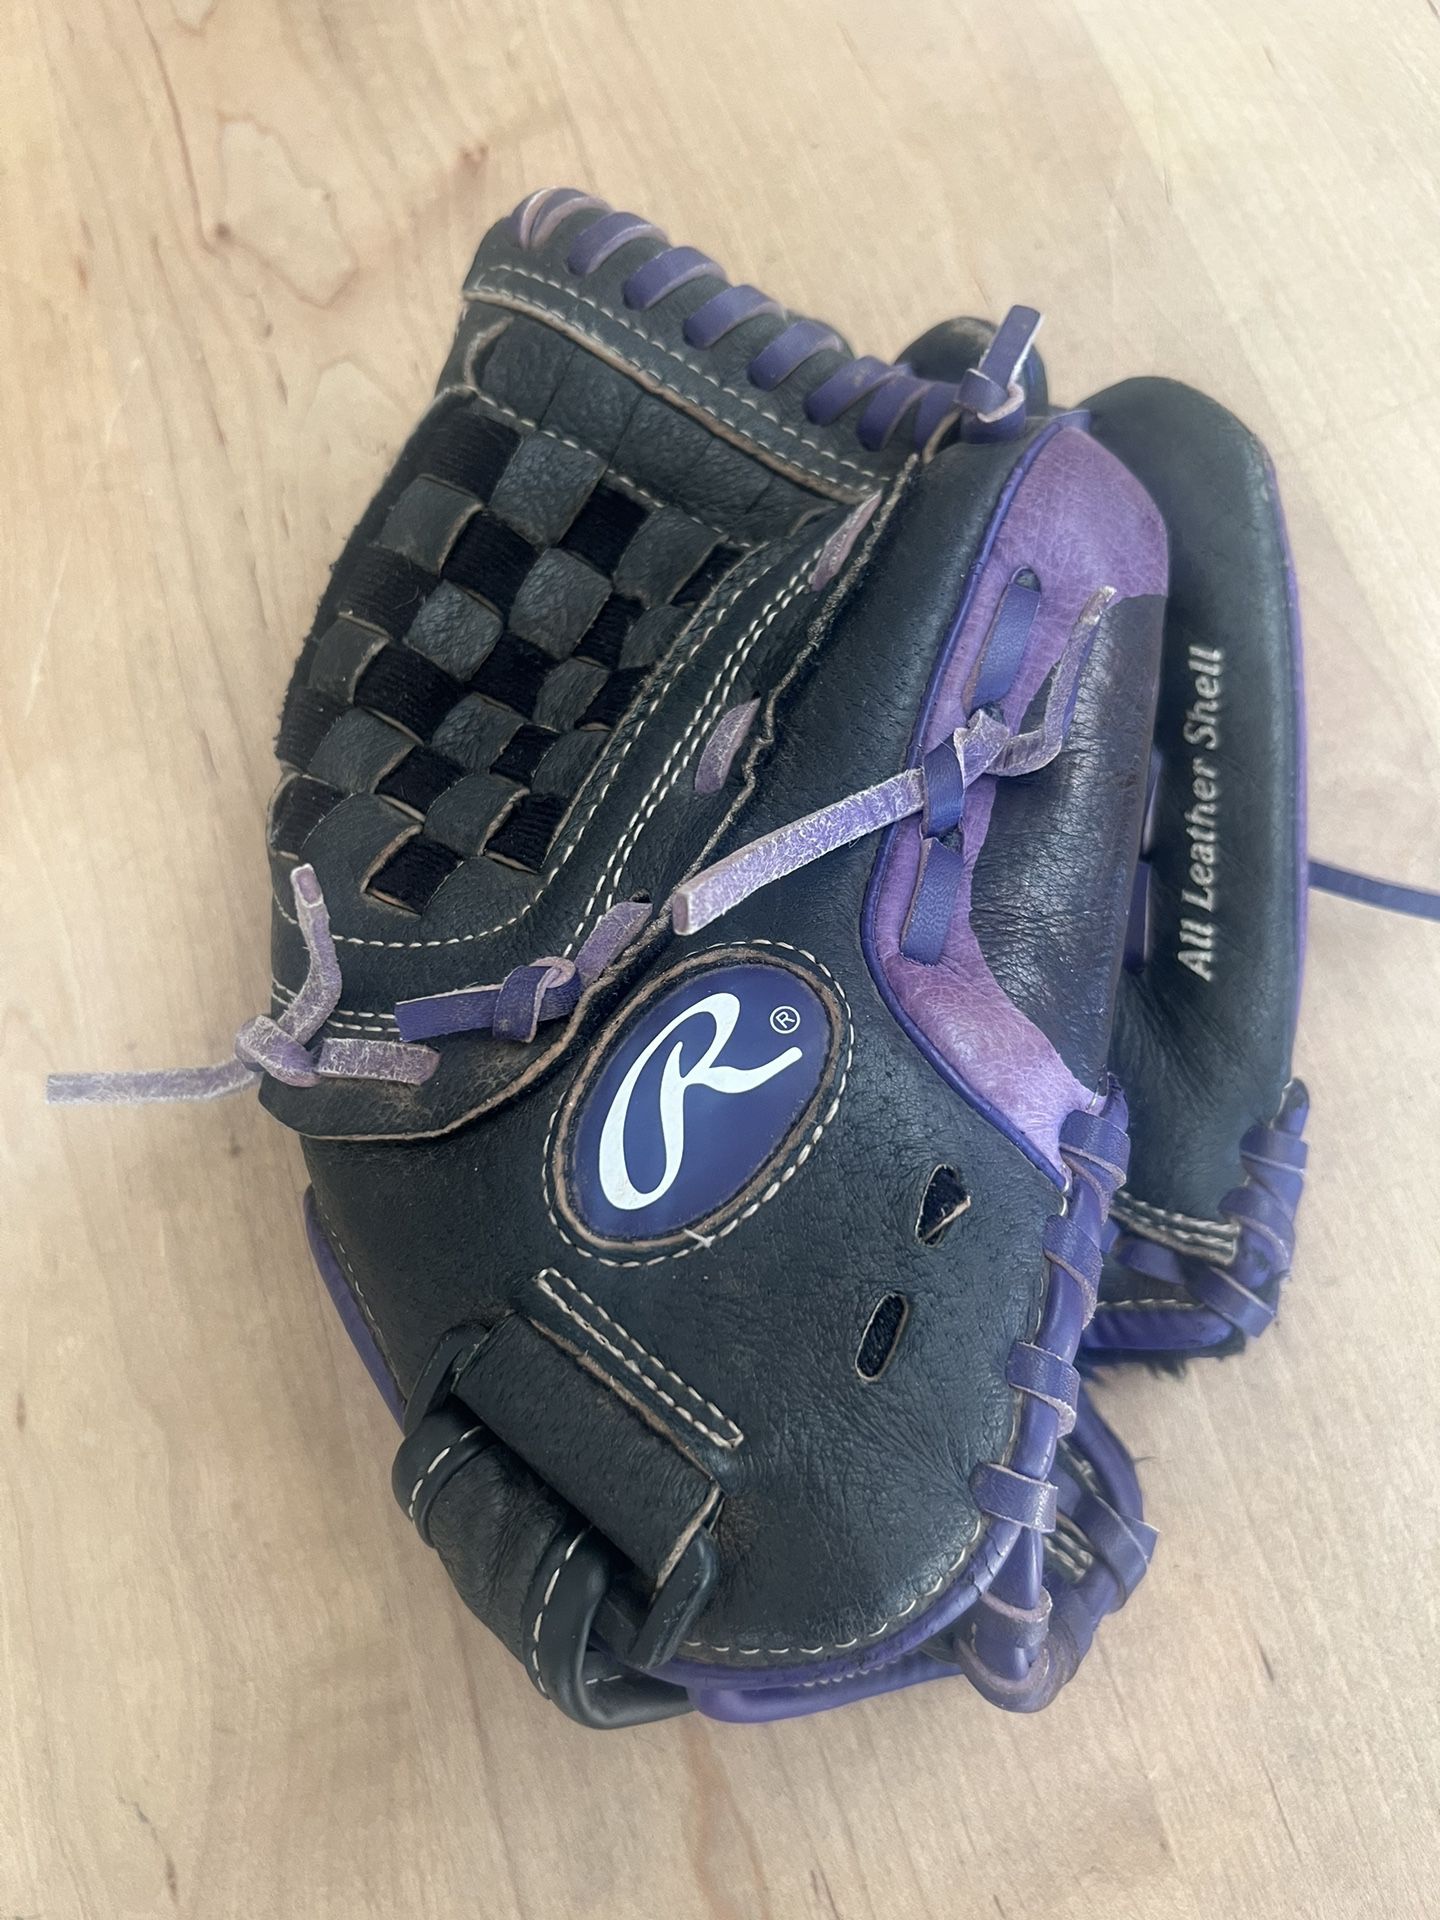 Rawlings HFP150BP 11.5” Youth Leather Baseball Softball Glove Exellent Condition